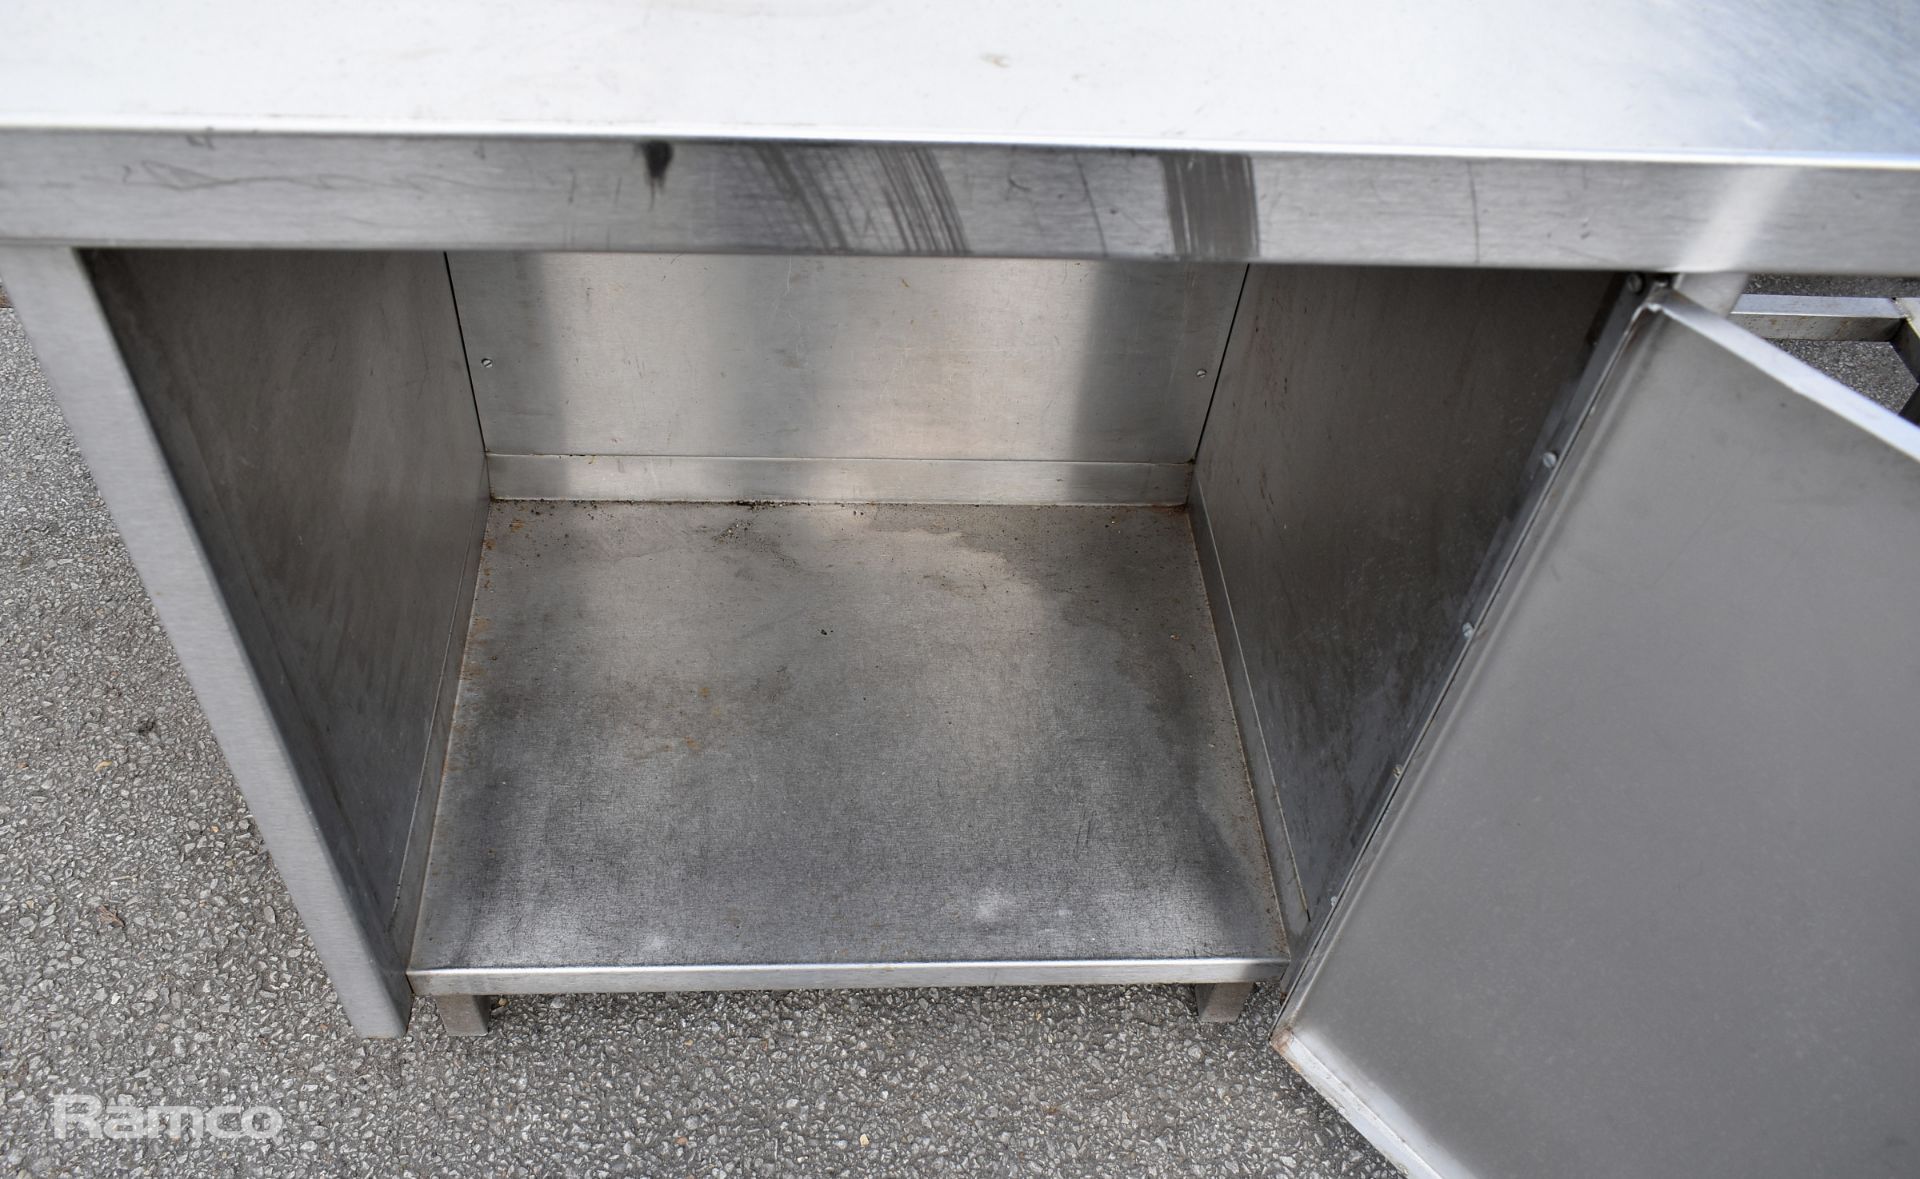 Stainless steel work surface with under counter cupboard - W 2000 x D 700 x H 830mm - Image 3 of 4